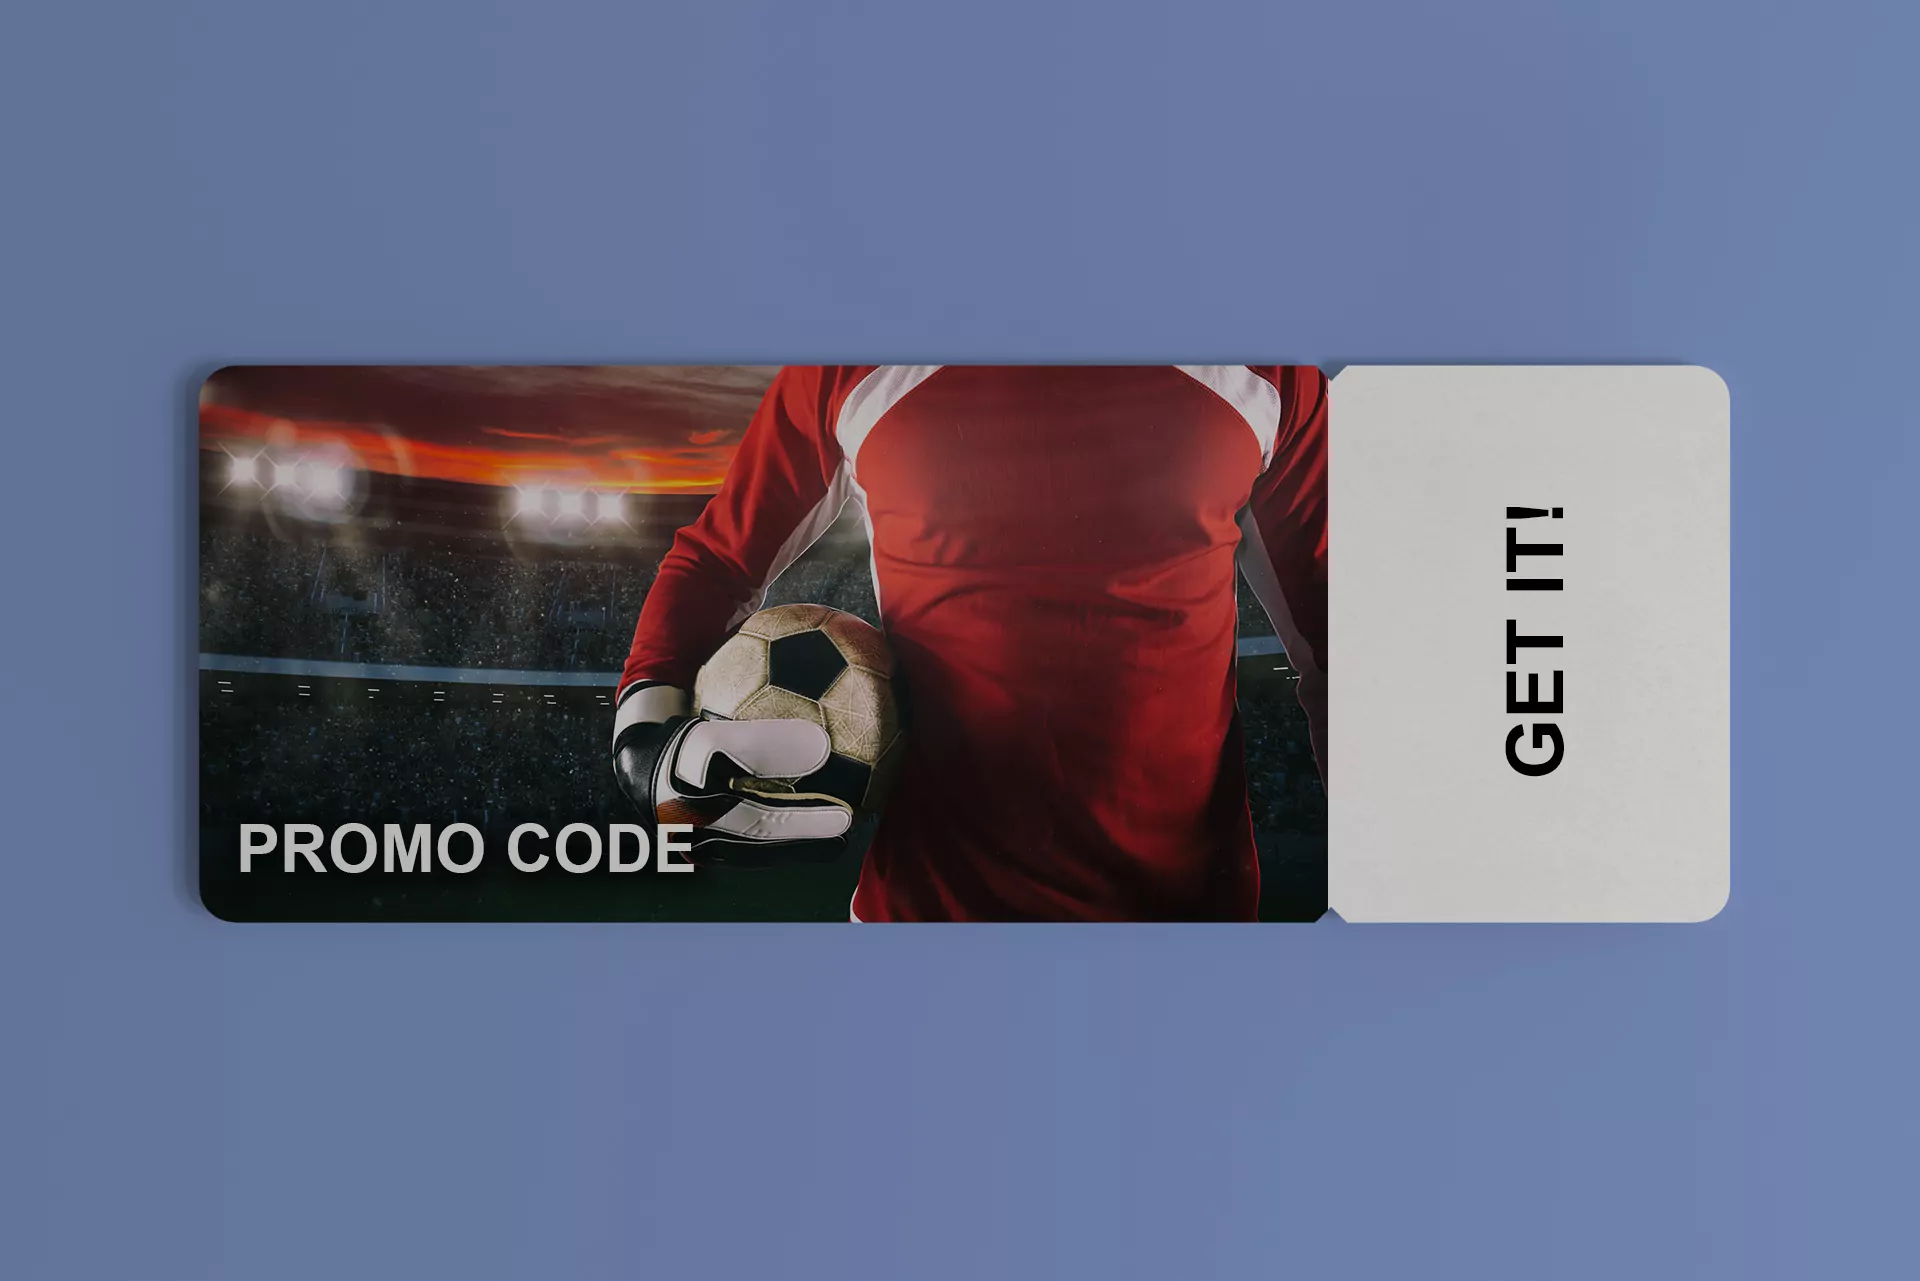 If you know a promo code, type it in the needed box to get the bonus for your bets.